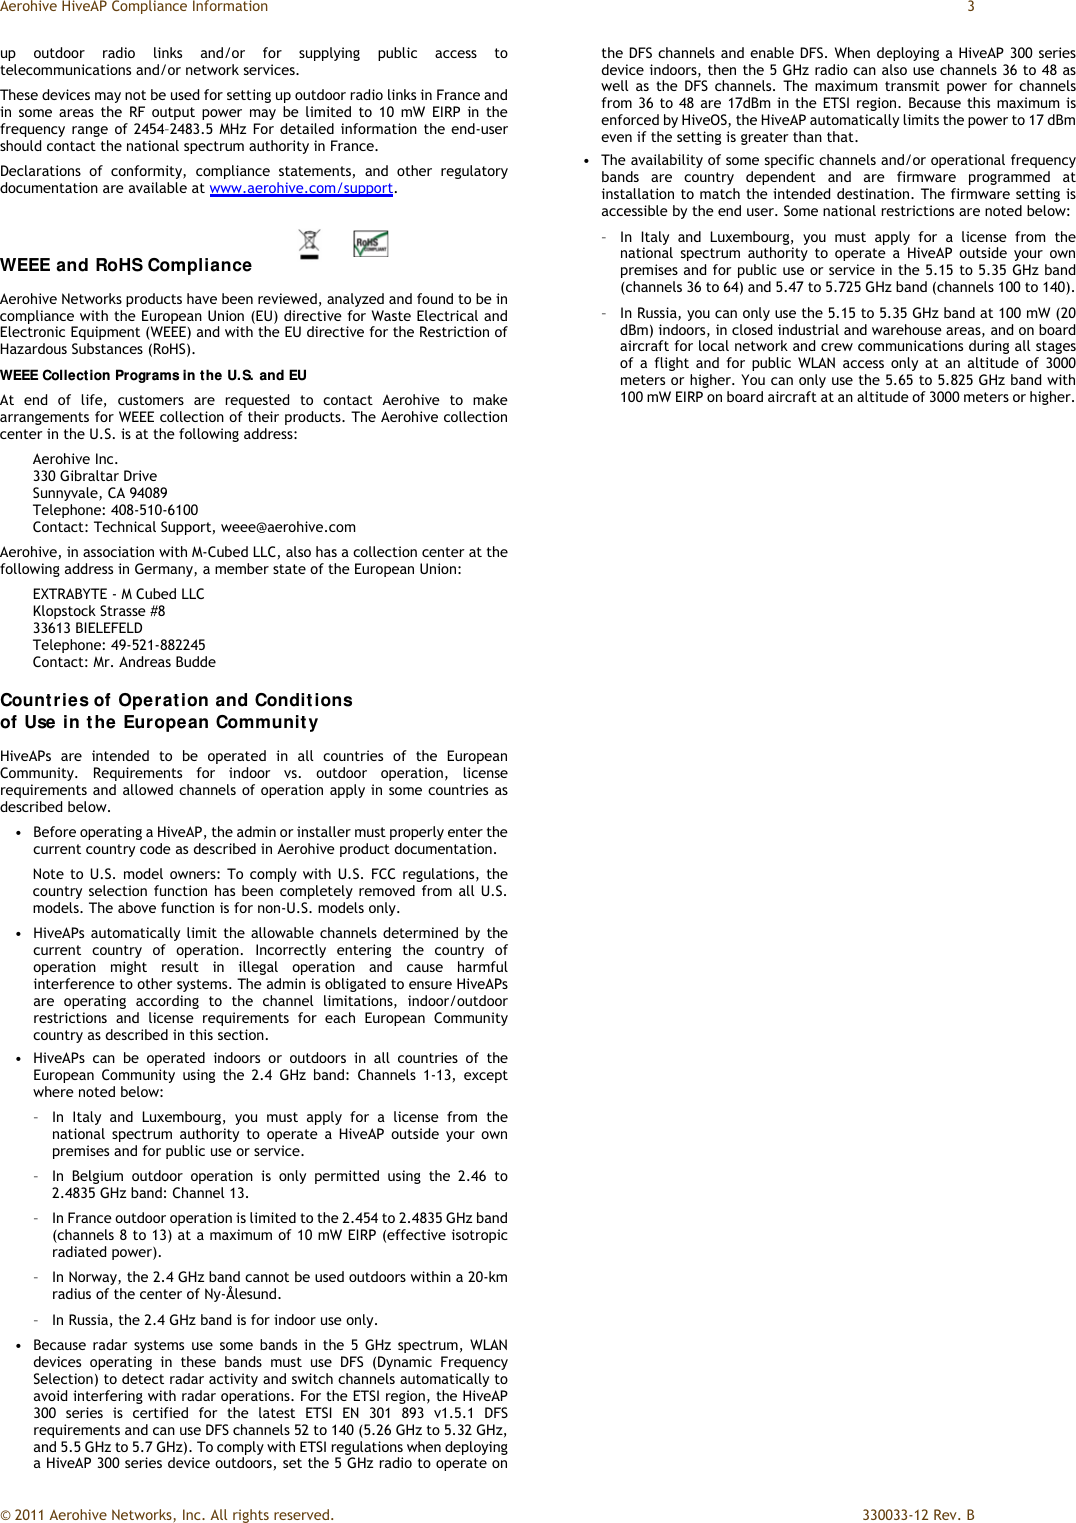 Aerohive HiveAP Compliance Information  3 © 2011 Aerohive Networks, Inc. All rights reserved.    330033-12 Rev. B up outdoor radio links and/or for supplying public access to telecommunications and/or network services. These devices may not be used for setting up outdoor radio links in France and in some areas the RF output power may be limited to 10 mW EIRP in the frequency range of 2454–2483.5 MHz For detailed information the end-user should contact the national spectrum authority in France. Declarations of conformity, compliance statements, and other regulatory documentation are available at www.aerohive.com/support. WEEE and RoHS Compliance  Aerohive Networks products have been reviewed, analyzed and found to be in compliance with the European Union (EU) directive for Waste Electrical and Electronic Equipment (WEEE) and with the EU directive for the Restriction of Hazardous Substances (RoHS). WEEE Collection Programs in the U.S. and EU At end of life, customers are requested to contact Aerohive to make arrangements for WEEE collection of their products. The Aerohive collection center in the U.S. is at the following address: Aerohive Inc.  330 Gibraltar Drive Sunnyvale, CA 94089 Telephone: 408-510-6100 Contact: Technical Support, weee@aerohive.com Aerohive, in association with M-Cubed LLC, also has a collection center at the following address in Germany, a member state of the European Union: EXTRABYTE - M Cubed LLC Klopstock Strasse #8 33613 BIELEFELD Telephone: 49-521-882245 Contact: Mr. Andreas Budde Countries of Operation and Conditions  of Use in the European Community HiveAPs are intended to be operated in all countries of the European Community. Requirements for indoor vs. outdoor operation, license requirements and allowed channels of operation apply in some countries as described below. •   Before operating a HiveAP, the admin or installer must properly enter the current country code as described in Aerohive product documentation. Note to U.S. model owners: To comply with U.S. FCC regulations, the country selection function has been completely removed from all U.S. models. The above function is for non-U.S. models only.  •   HiveAPs automatically limit the allowable channels determined by the current country of operation. Incorrectly entering the country of operation might result in illegal operation and cause harmful interference to other systems. The admin is obligated to ensure HiveAPs are operating according to the channel limitations, indoor/outdoor restrictions and license requirements for each European Community country as described in this section. •   HiveAPs can be operated indoors or outdoors in all countries of the European Community using the 2.4 GHz band: Channels 1-13, except where noted below: –   In Italy and Luxembourg, you must apply for a license from the national spectrum authority to operate a HiveAP outside your own premises and for public use or service. –   In Belgium outdoor operation is only permitted using the 2.46 to 2.4835 GHz band: Channel 13. –   In France outdoor operation is limited to the 2.454 to 2.4835 GHz band (channels 8 to 13) at a maximum of 10 mW EIRP (effective isotropic radiated power). –   In Norway, the 2.4 GHz band cannot be used outdoors within a 20-km radius of the center of Ny-Ålesund. –   In Russia, the 2.4 GHz band is for indoor use only. •   Because radar systems use some bands in the 5 GHz spectrum, WLAN devices operating in these bands must use DFS (Dynamic Frequency Selection) to detect radar activity and switch channels automatically to avoid interfering with radar operations. For the ETSI region, the HiveAP 300 series is certified for the latest ETSI EN 301 893 v1.5.1 DFS requirements and can use DFS channels 52 to 140 (5.26 GHz to 5.32 GHz, and 5.5 GHz to 5.7 GHz). To comply with ETSI regulations when deploying a HiveAP 300 series device outdoors, set the 5 GHz radio to operate on the DFS channels and enable DFS. When deploying a HiveAP 300 series device indoors, then the 5 GHz radio can also use channels 36 to 48 as well as the DFS channels. The maximum transmit power for channels from 36 to 48 are 17dBm in the ETSI region. Because this maximum is enforced by HiveOS, the HiveAP automatically limits the power to 17 dBm even if the setting is greater than that. •   The availability of some specific channels and/or operational frequency bands are country dependent and are firmware programmed at installation to match the intended destination. The firmware setting is accessible by the end user. Some national restrictions are noted below: –   In Italy and Luxembourg, you must apply for a license from the national spectrum authority to operate a HiveAP outside your own premises and for public use or service in the 5.15 to 5.35 GHz band (channels 36 to 64) and 5.47 to 5.725 GHz band (channels 100 to 140). –   In Russia, you can only use the 5.15 to 5.35 GHz band at 100 mW (20 dBm) indoors, in closed industrial and warehouse areas, and on board aircraft for local network and crew communications during all stages of a flight and for public WLAN access only at an altitude of 3000 meters or higher. You can only use the 5.65 to 5.825 GHz band with 100 mW EIRP on board aircraft at an altitude of 3000 meters or higher. 